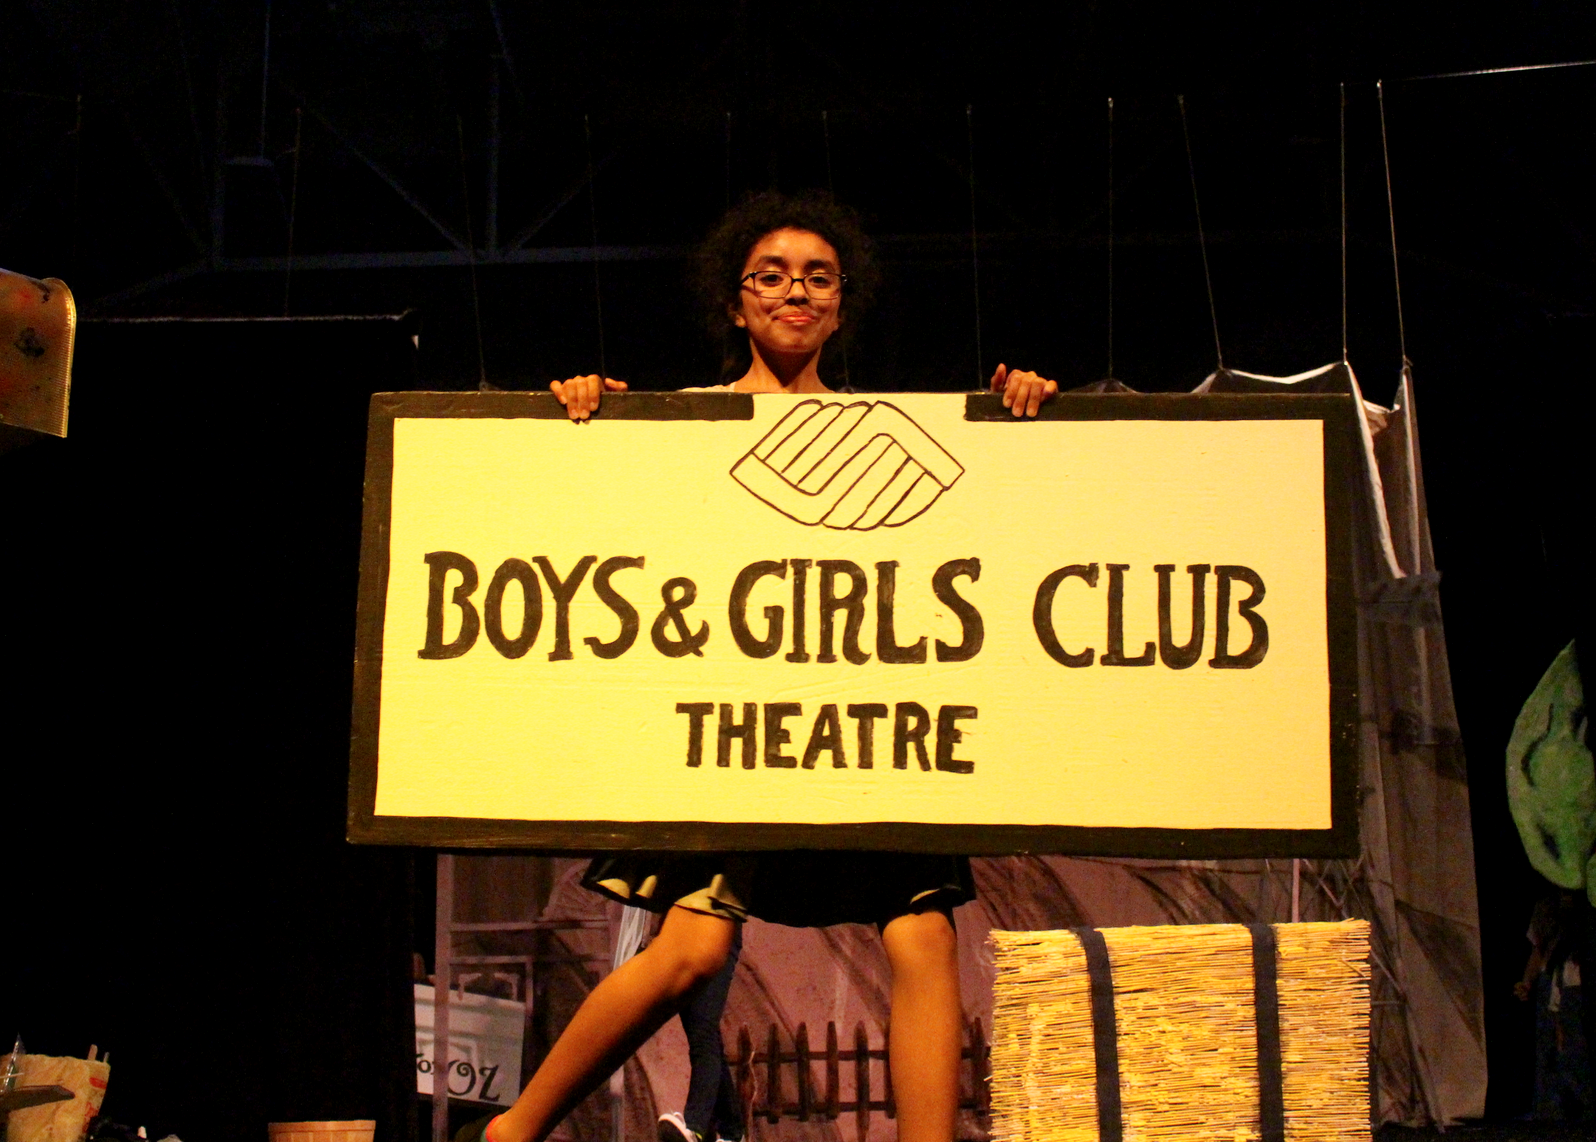 File photo. Boys &Girls Club Theatre, 2016. Photo: Leslie Yager